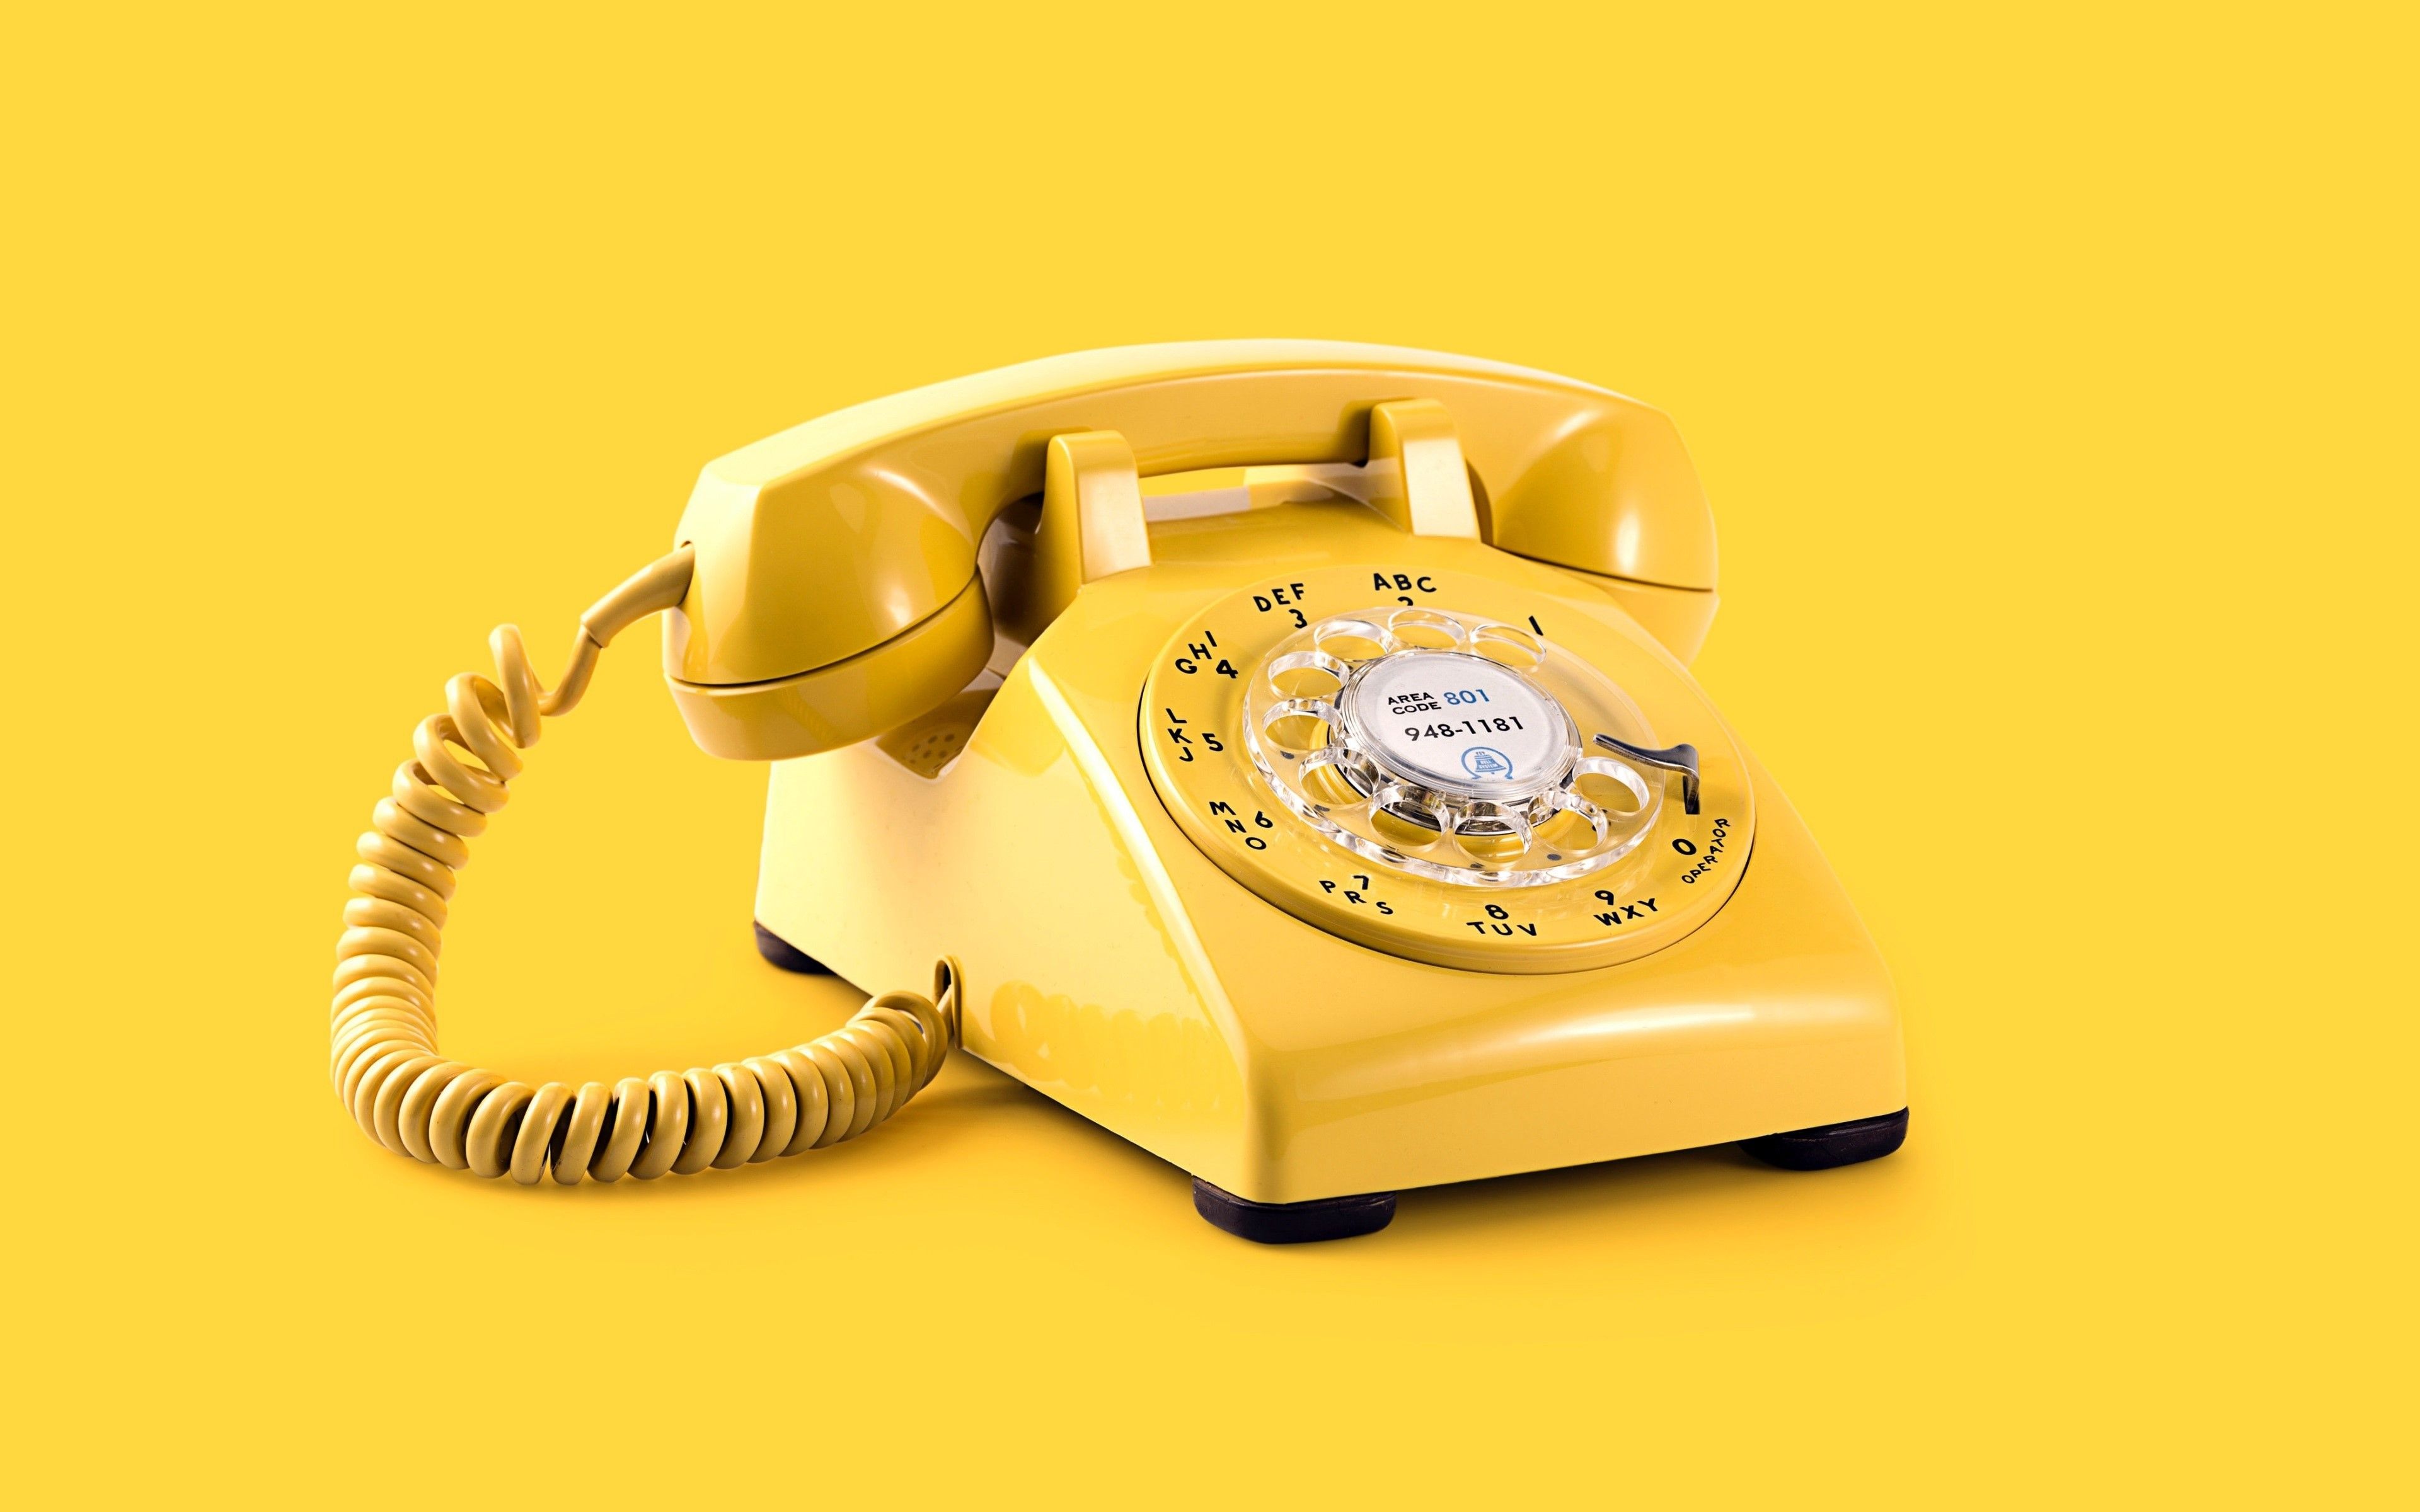 A yellow rotary phone on a yellow background - Yellow